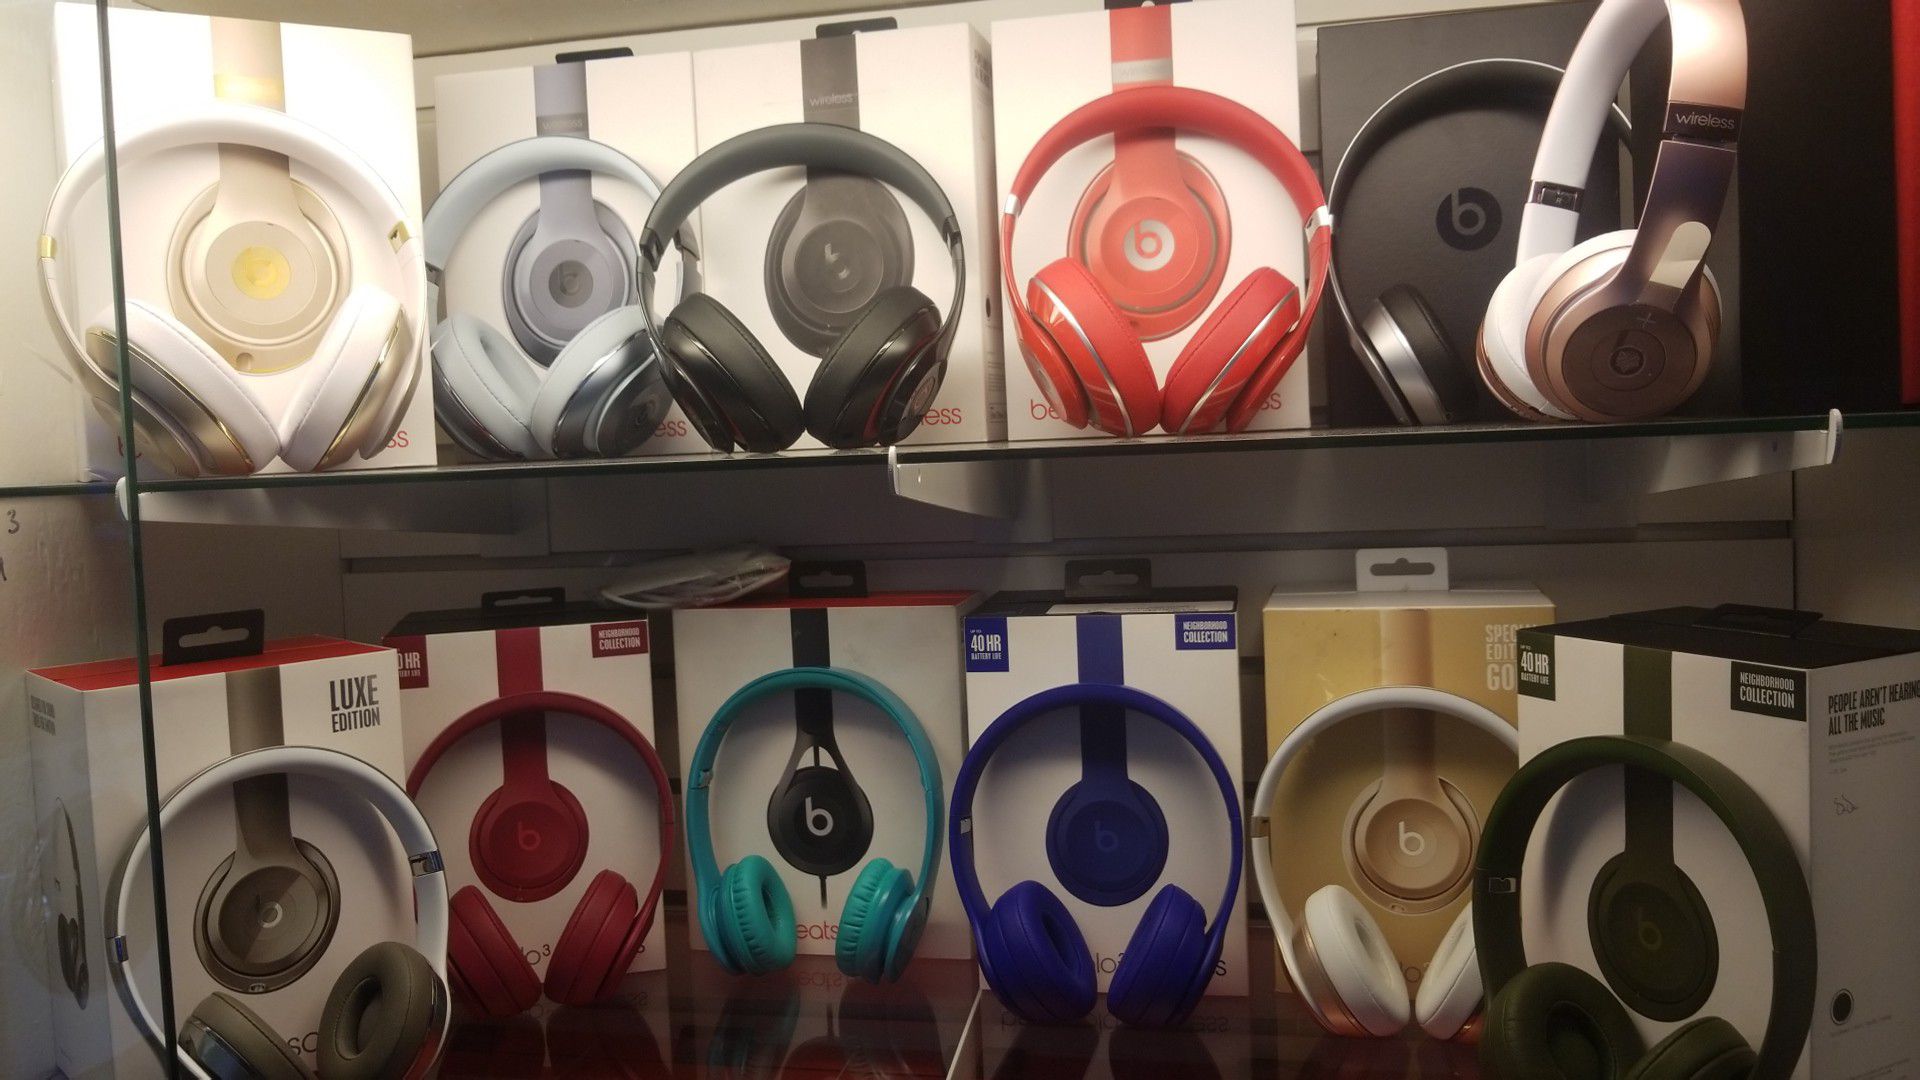 Beats Headphones for a Great price!